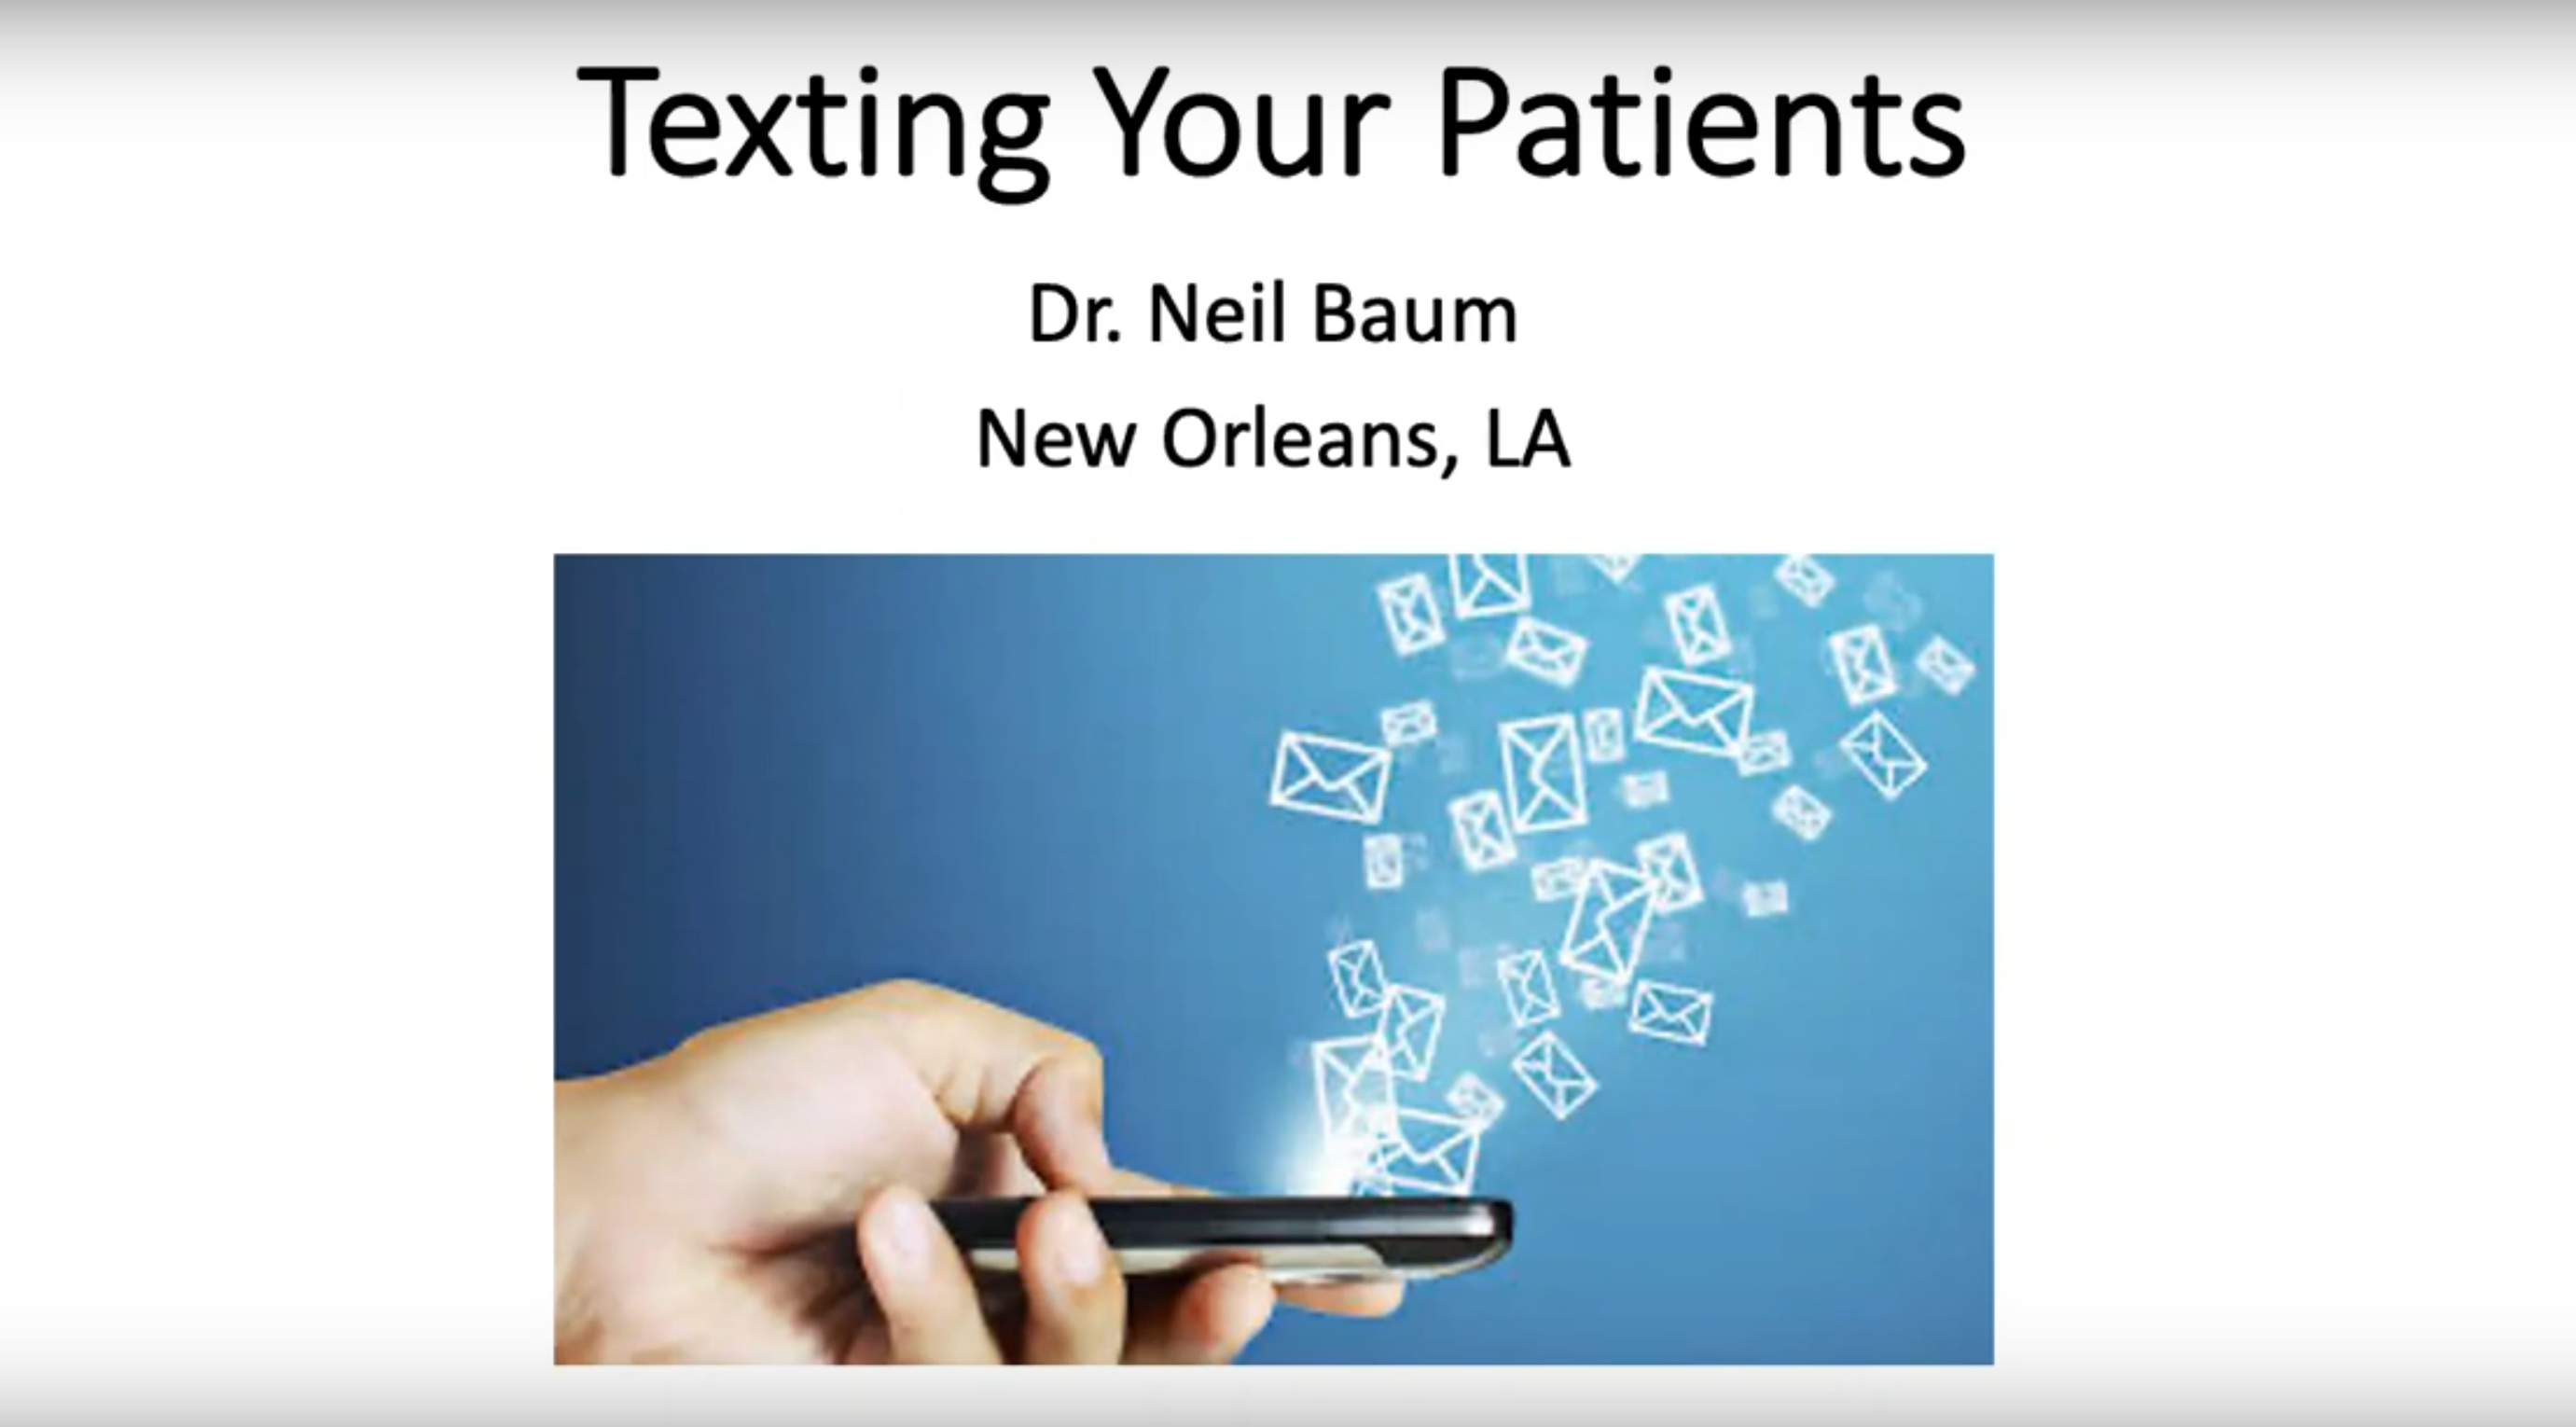 Tips for text messaging with your patients